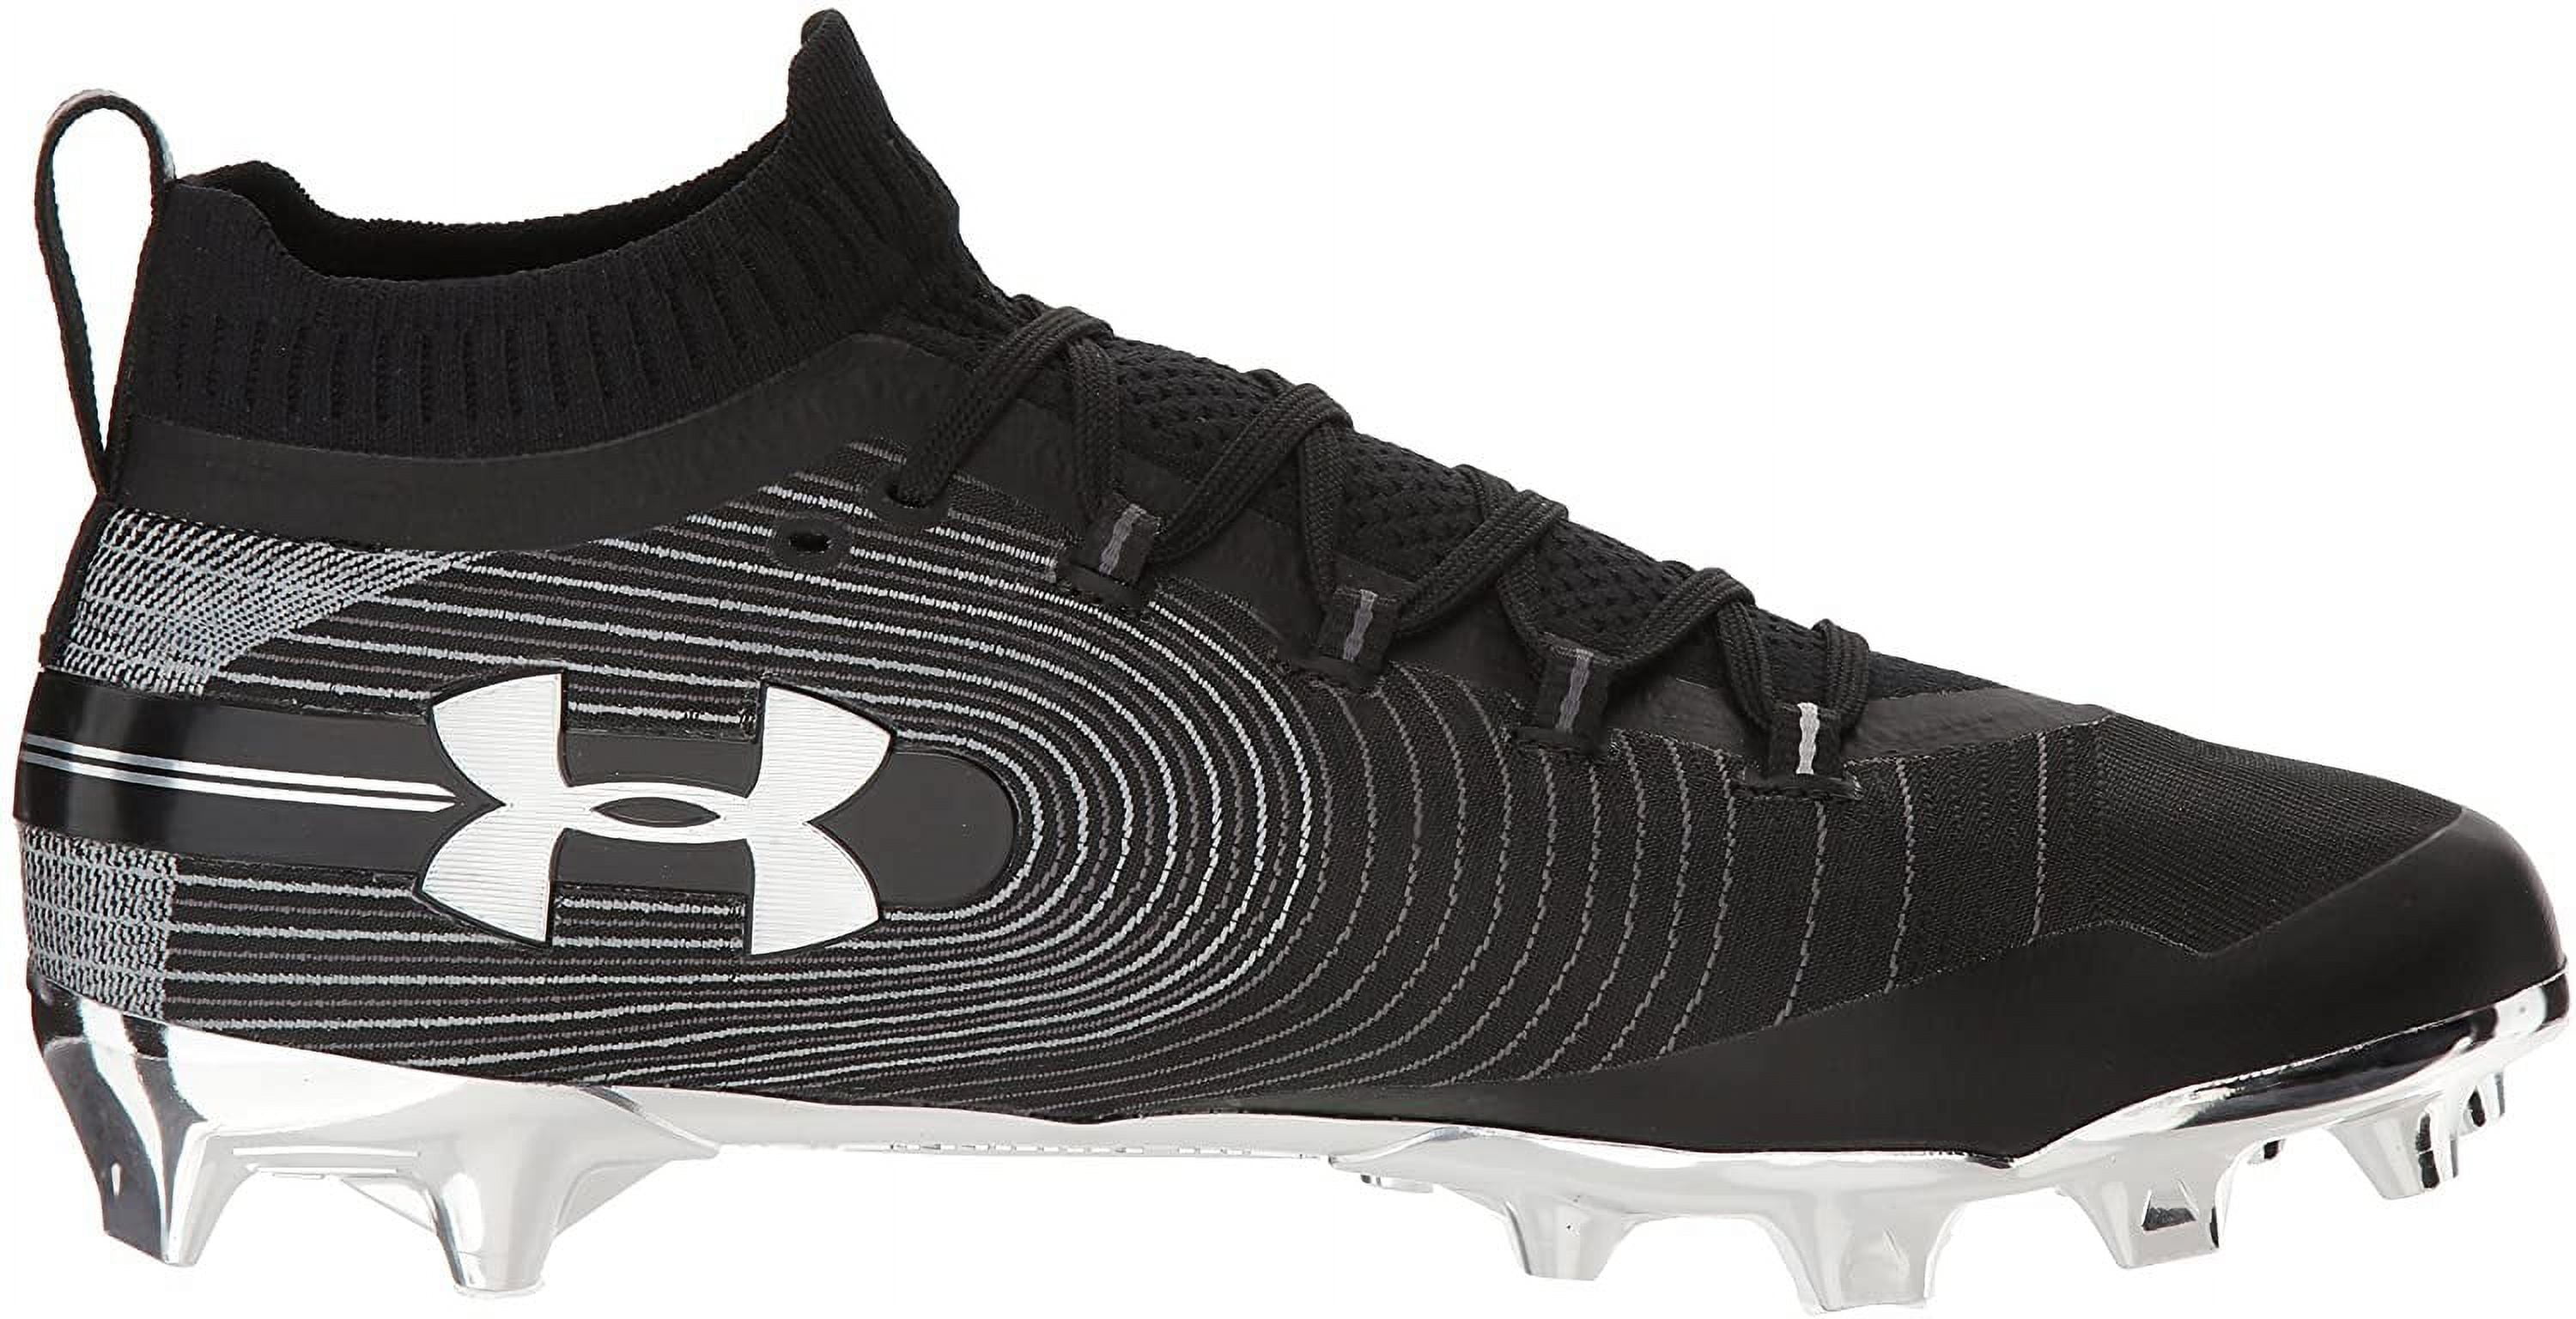 Men's Brand New Under Armour Low Top Spotlight MC Football Cleats. ($80 or  best offer!)